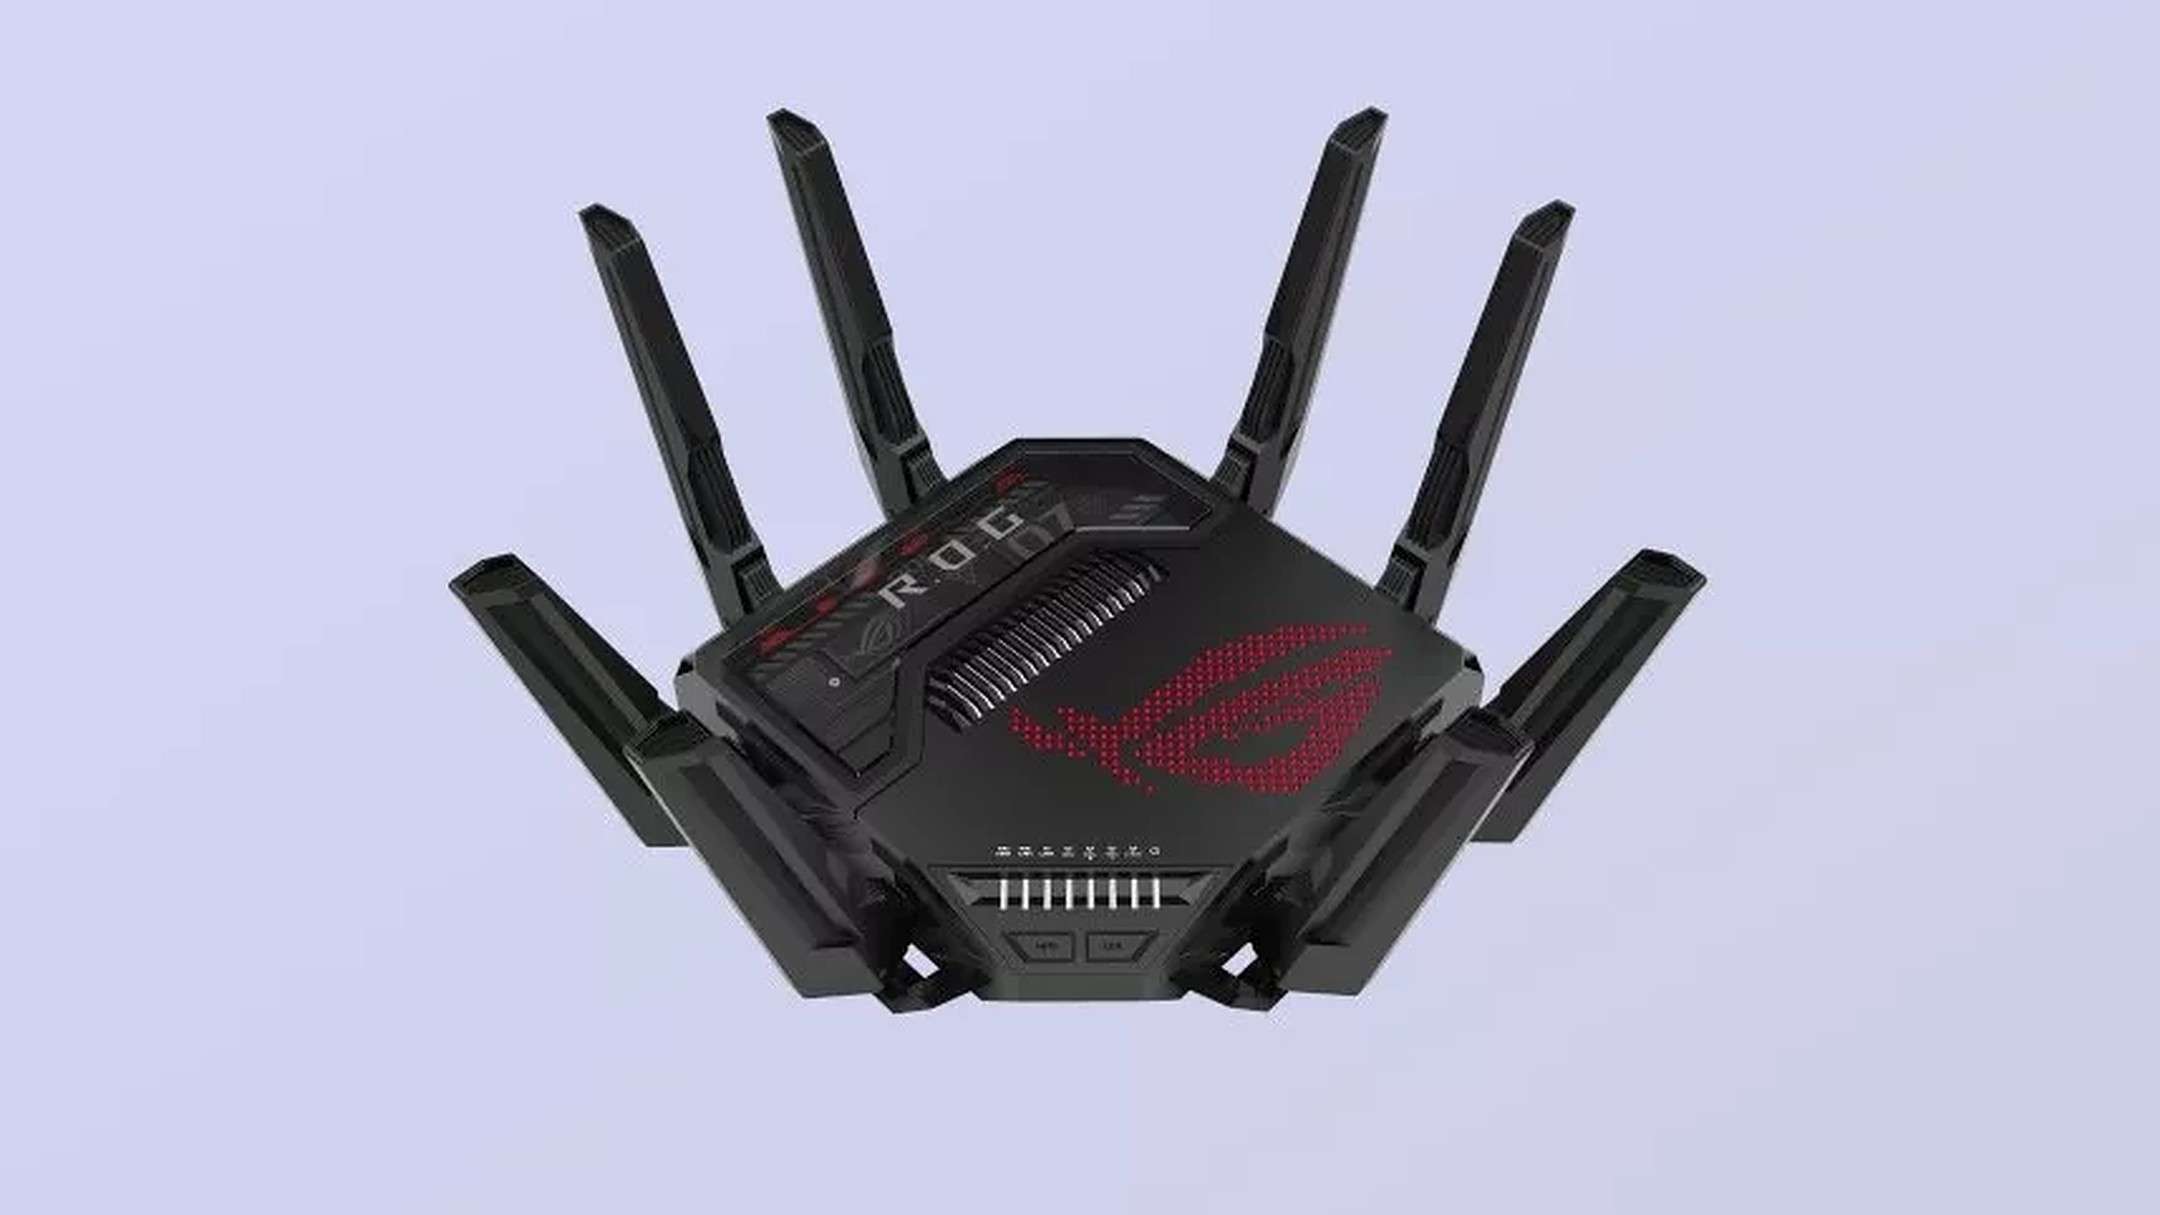 ASUS ROG Rapture GT-BE98 router gaming quad-band